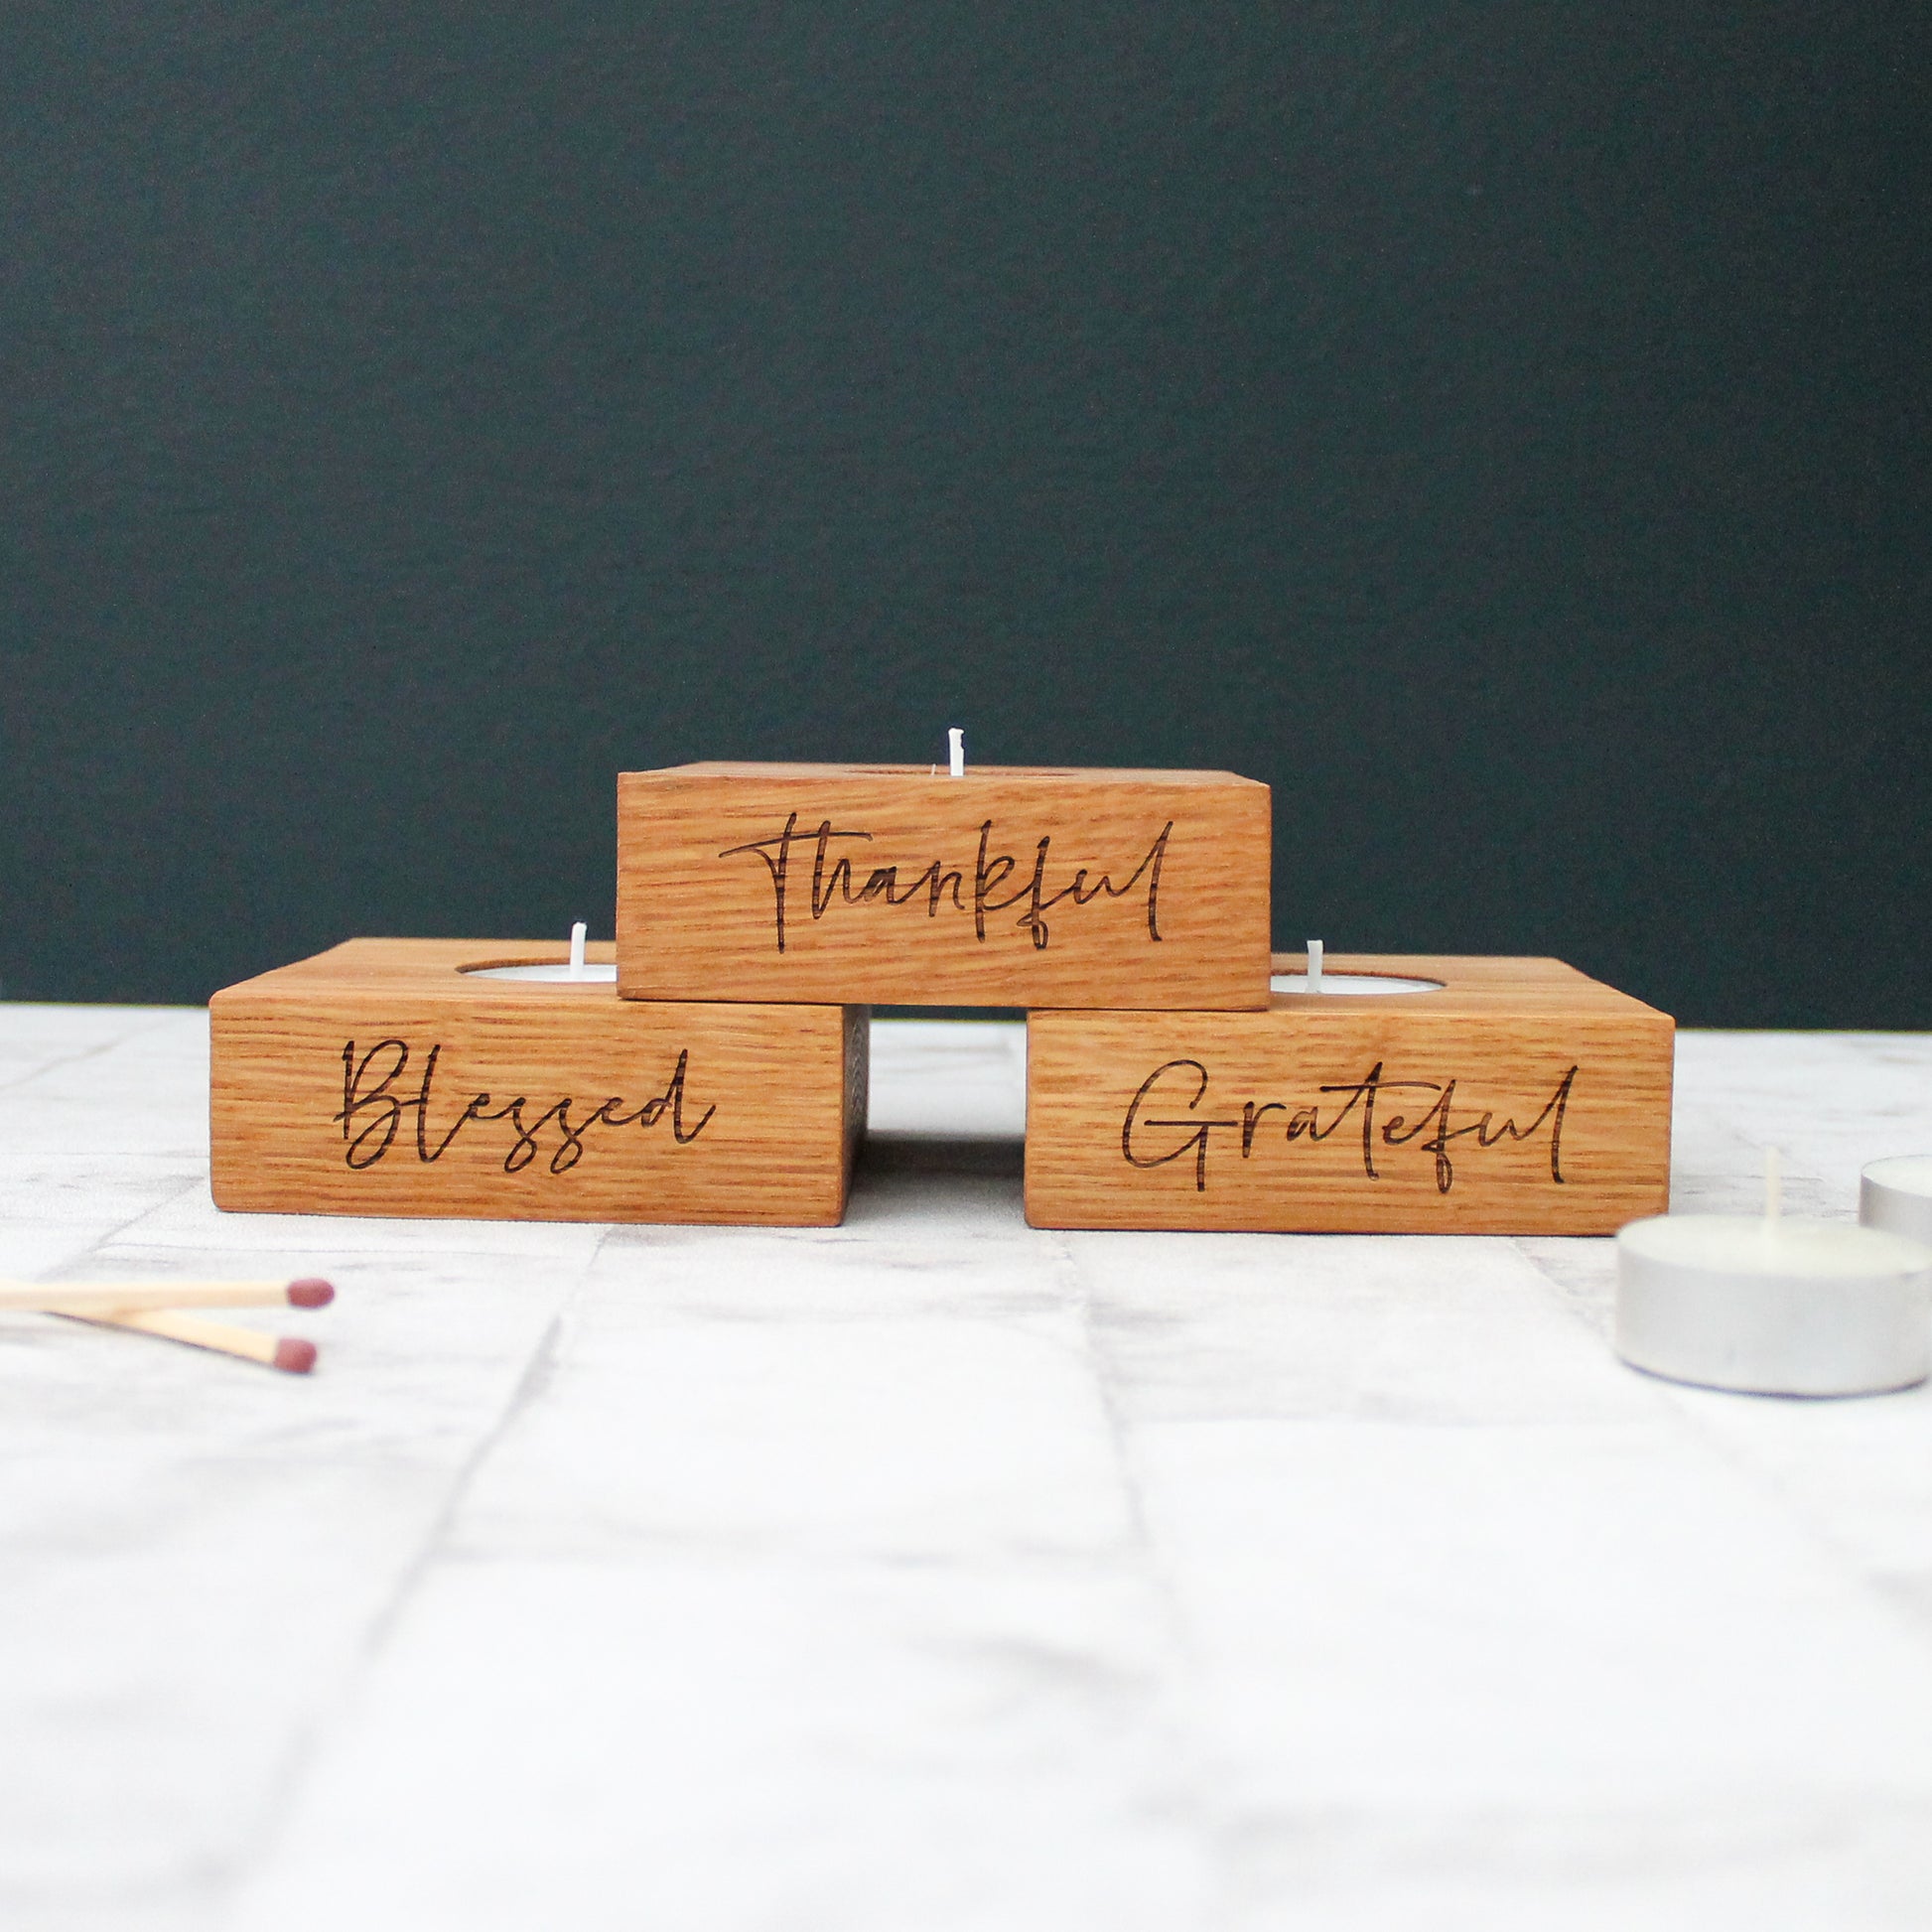 set of 3 solid oak tea light holders with the phrases grateful, thankful and blessed engraved on them 